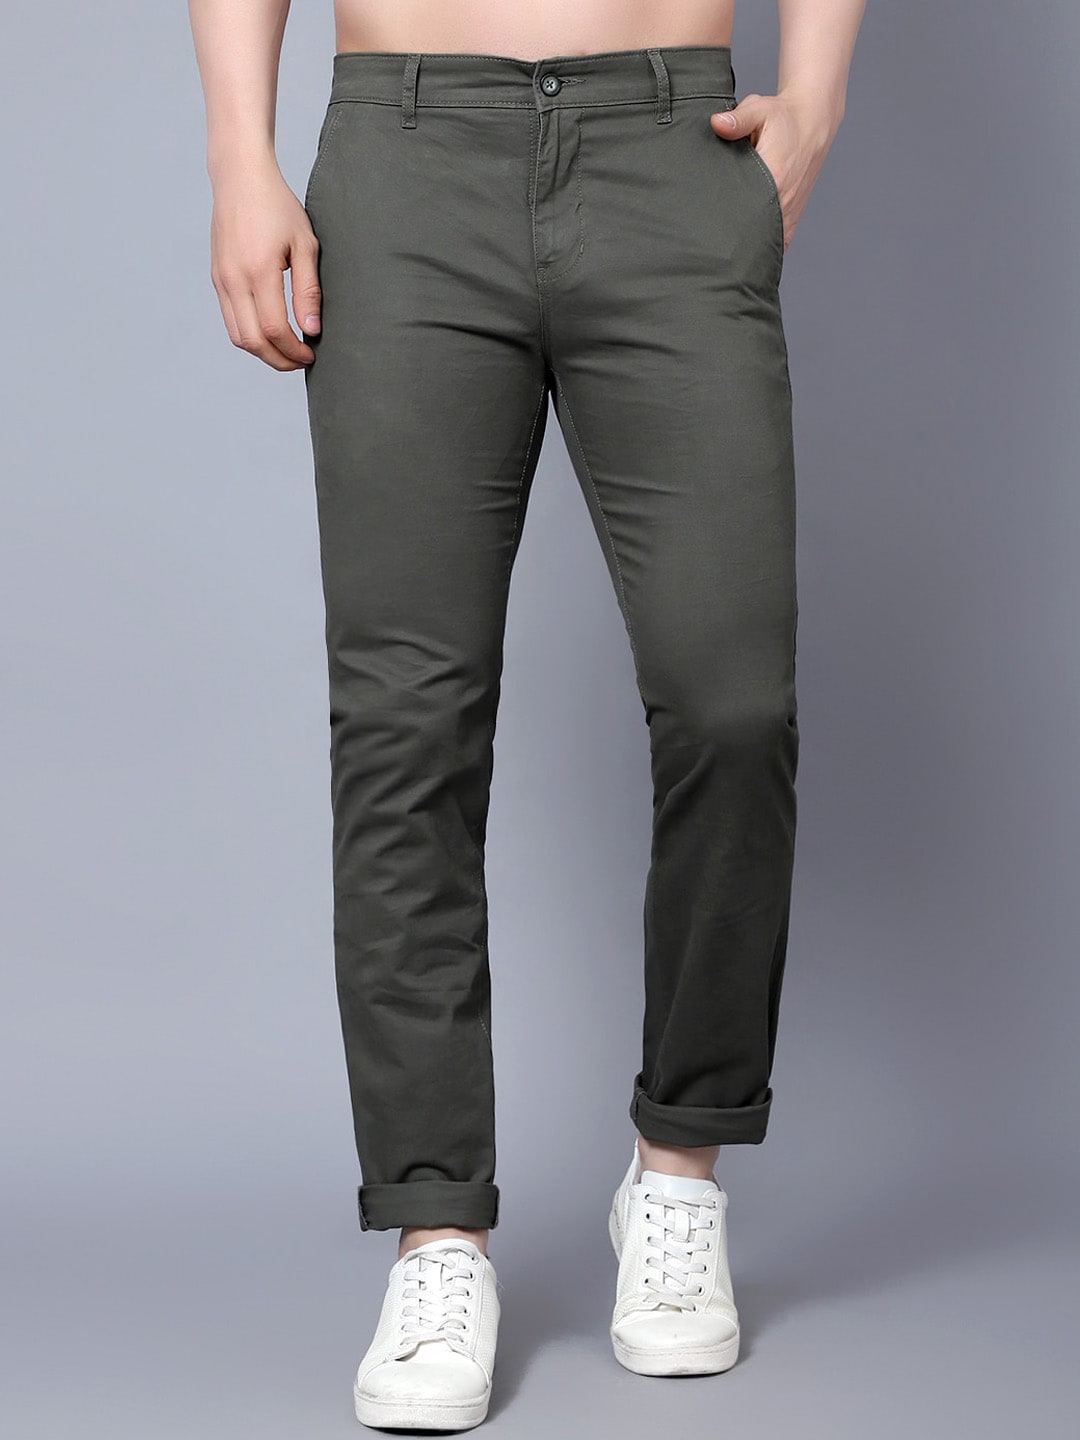 Cantabil Casual Trousers  Buy Cantabil Mens Fawn Trouser Online  Nykaa  Fashion